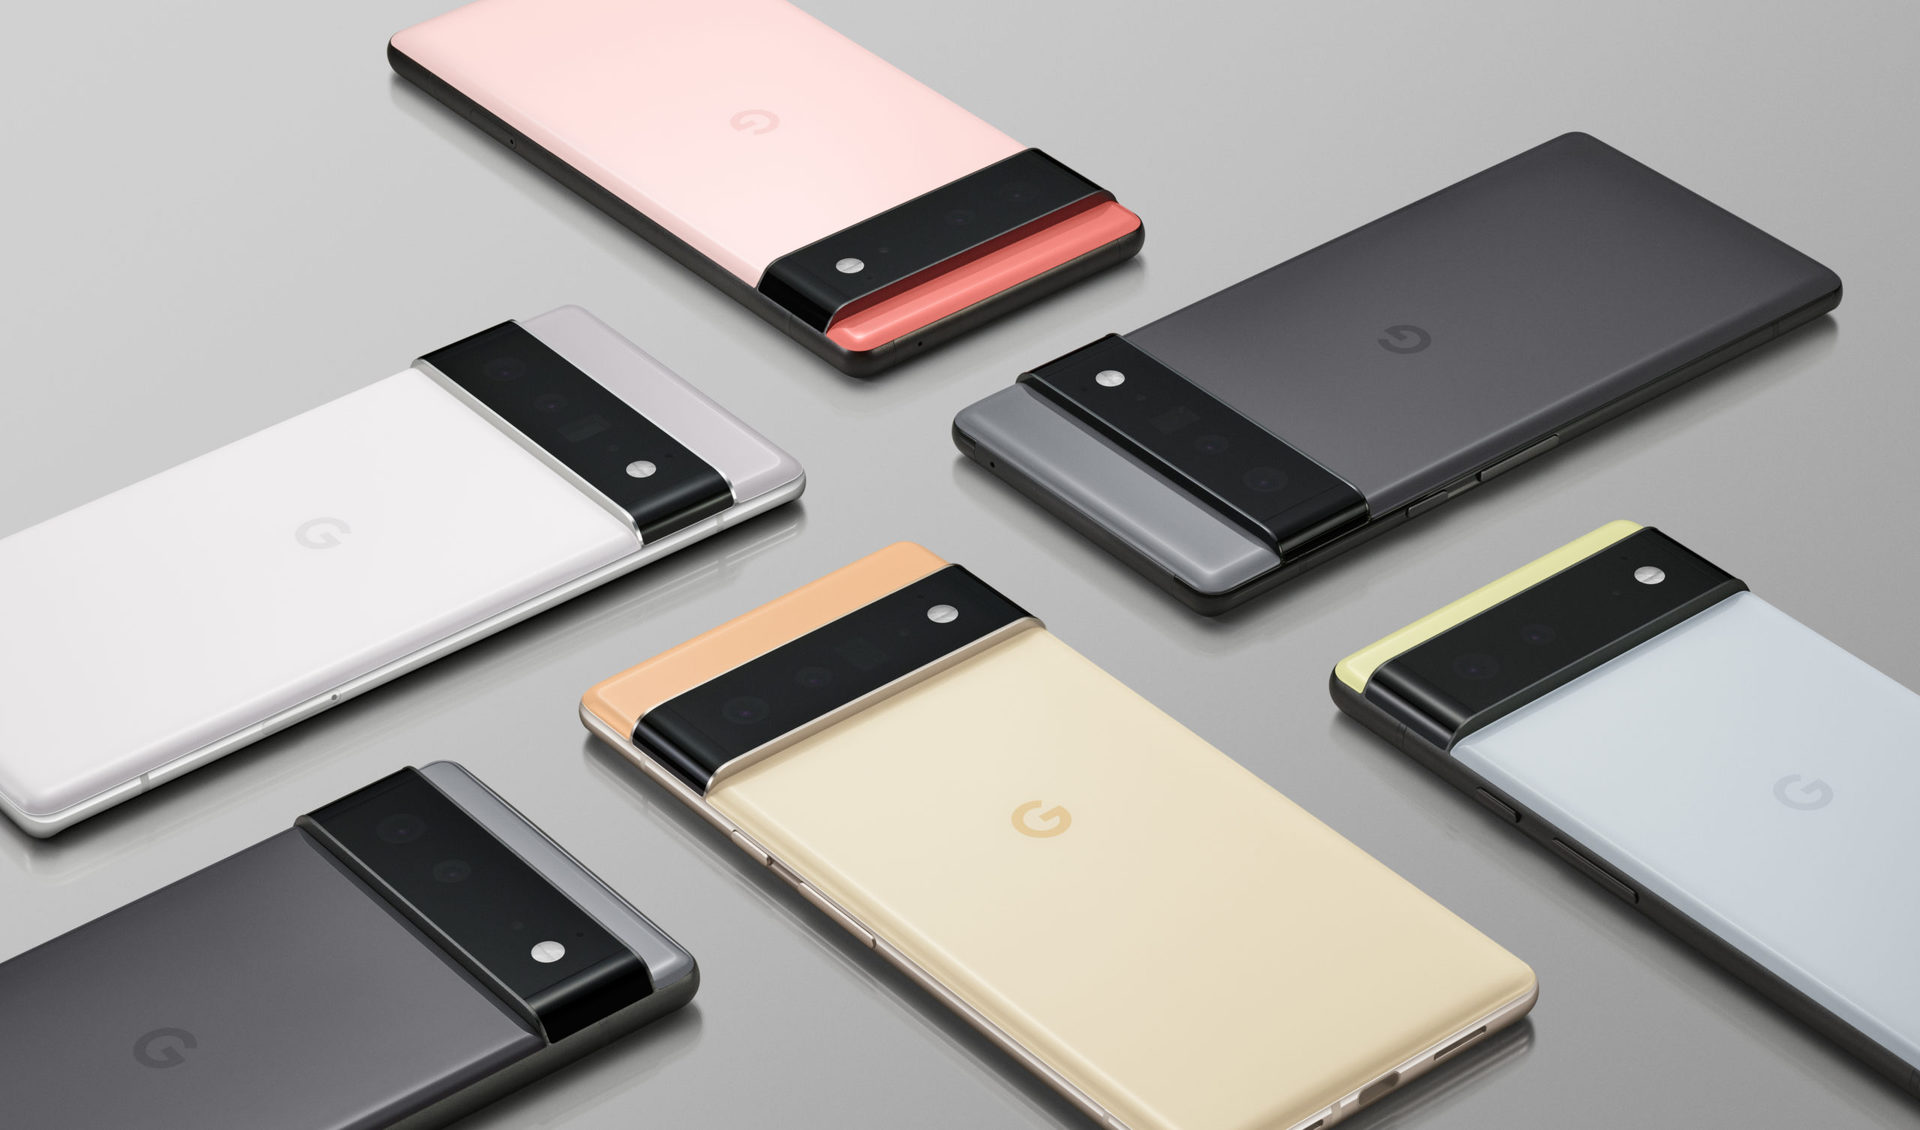 Here are the Google Pixel 6 color names and what we think they match to